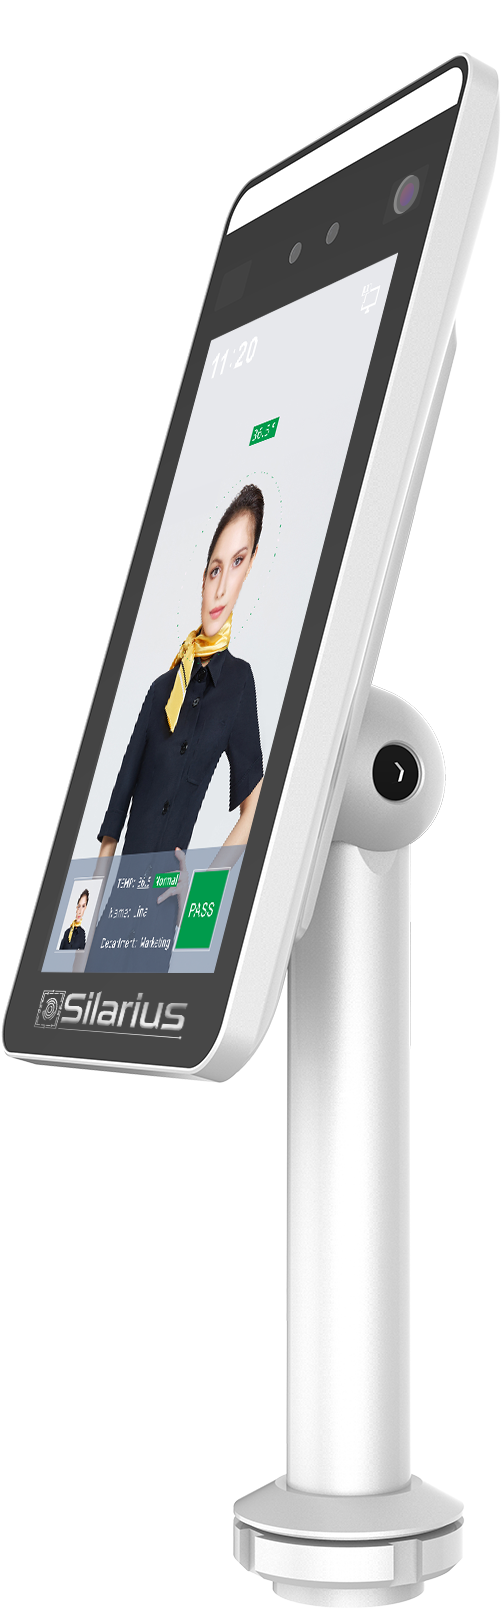 Silarius SIL-FRTEMP 7" Temperature Thermal Terminal with Face Recognition and Mask Detection (Table Stand Included) NDAA Compliant